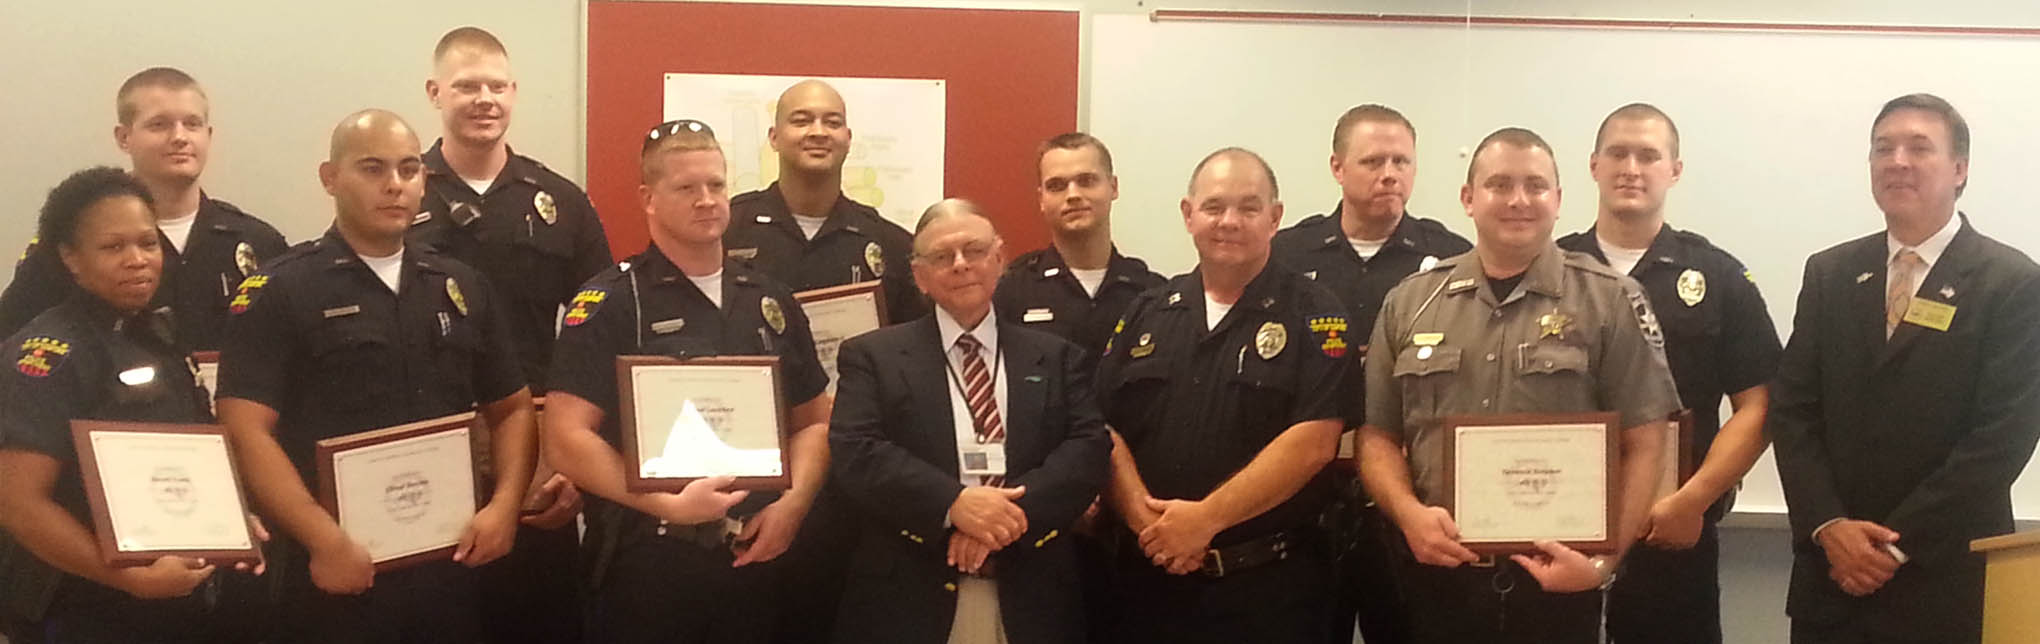 Click to enlarge,  Pictured at the graduation of the Lee County Crisis Intervention Team (CIT) training program are (left to right), front row: Keiomie Evans, Ellmar Benitez, and Michael Lankford, of the Sanford Police Department; Phil Hewett, of Sandhills Center LME/MCO; Captain Tony Hancox, of the Sanford Police Department; Terrance Simpson, of the Lee County Sheriff's Office; and Sanford Mayor Chet Mann; second row, Nickolas Taylor, Matthew Cotton, Alvero I. Leighton II, Greg Parker, William Roland and Kelly Rhyne, of the Sanford Police Department. 